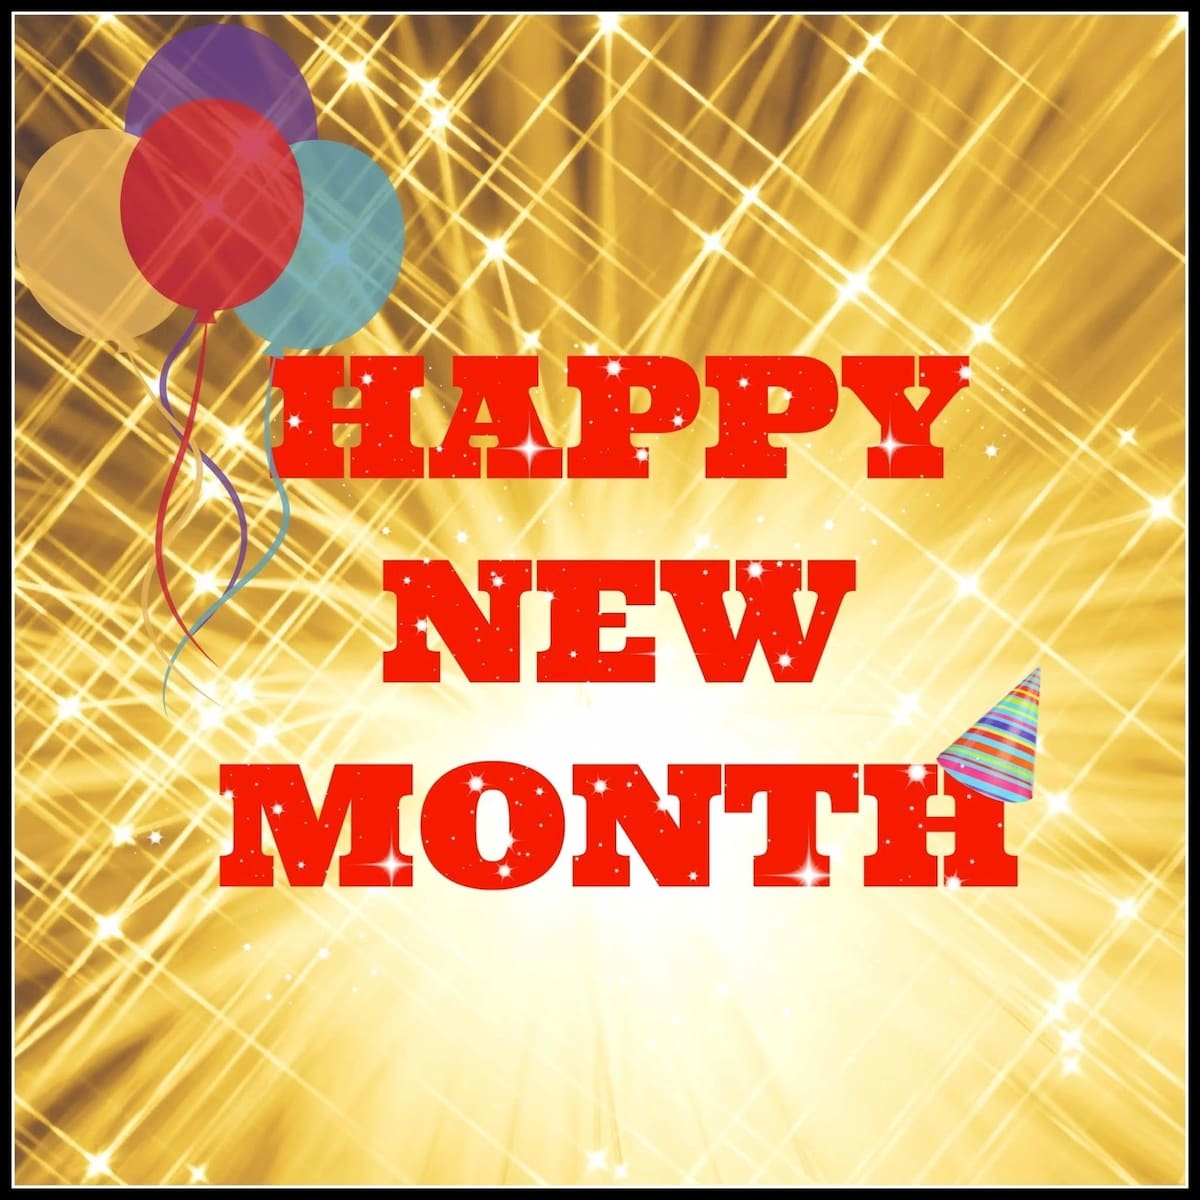 new month wishes
new month quotes
happy new month my love
funny new month messages
prayer for new month